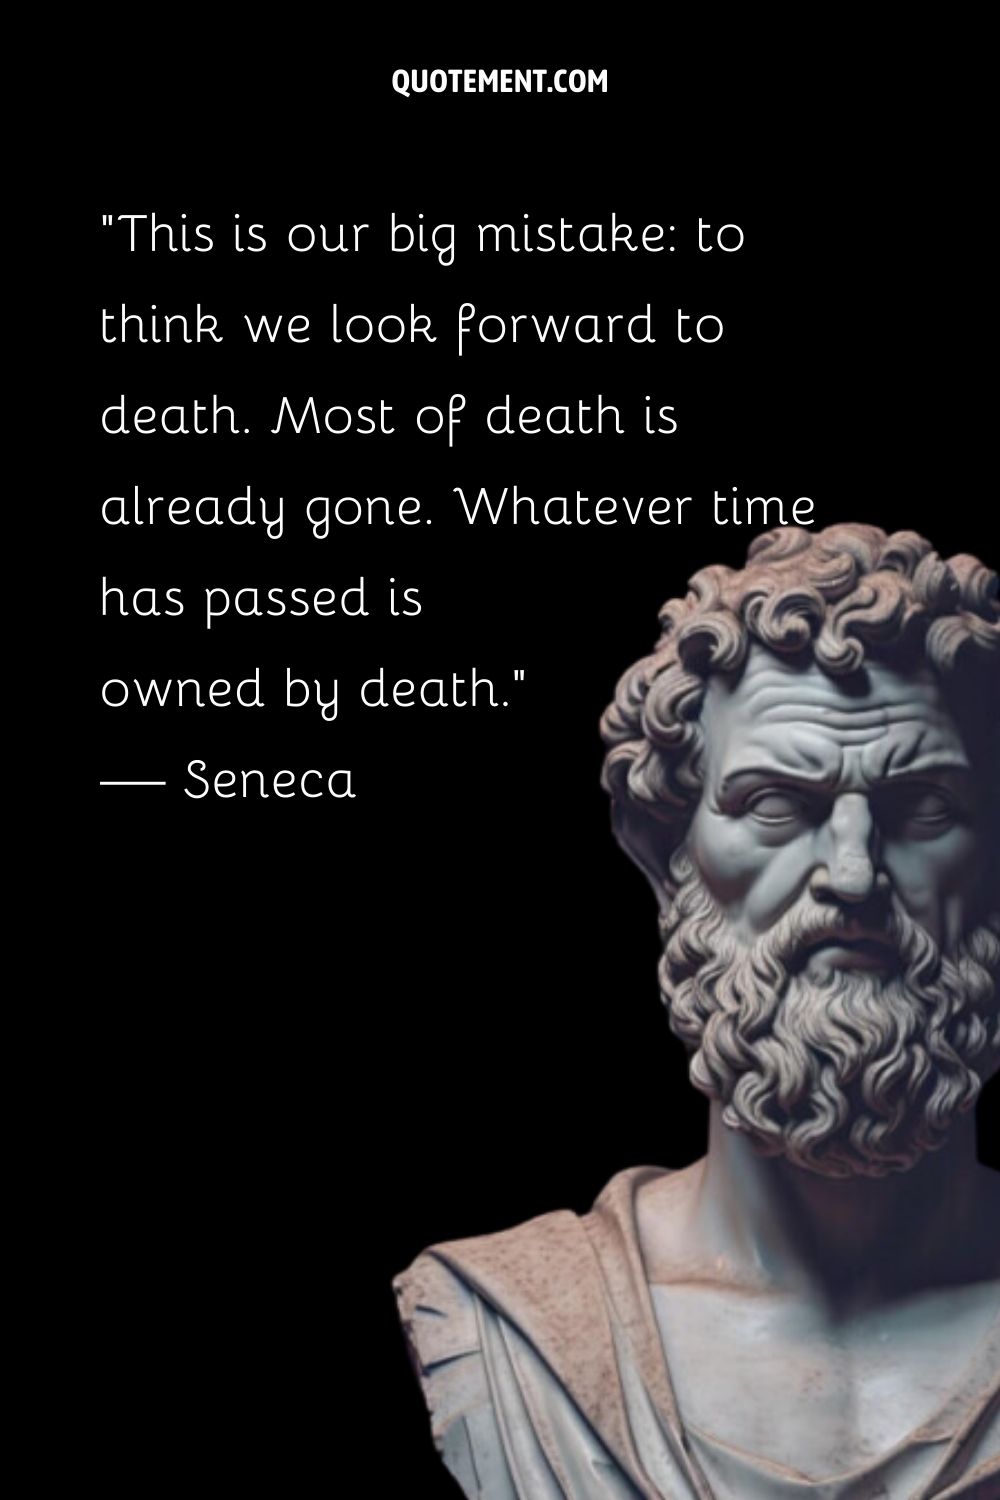 “This is our big mistake to think we look forward to death. Most of death is already gone. Whatever time has passed is owned by death.” — Seneca